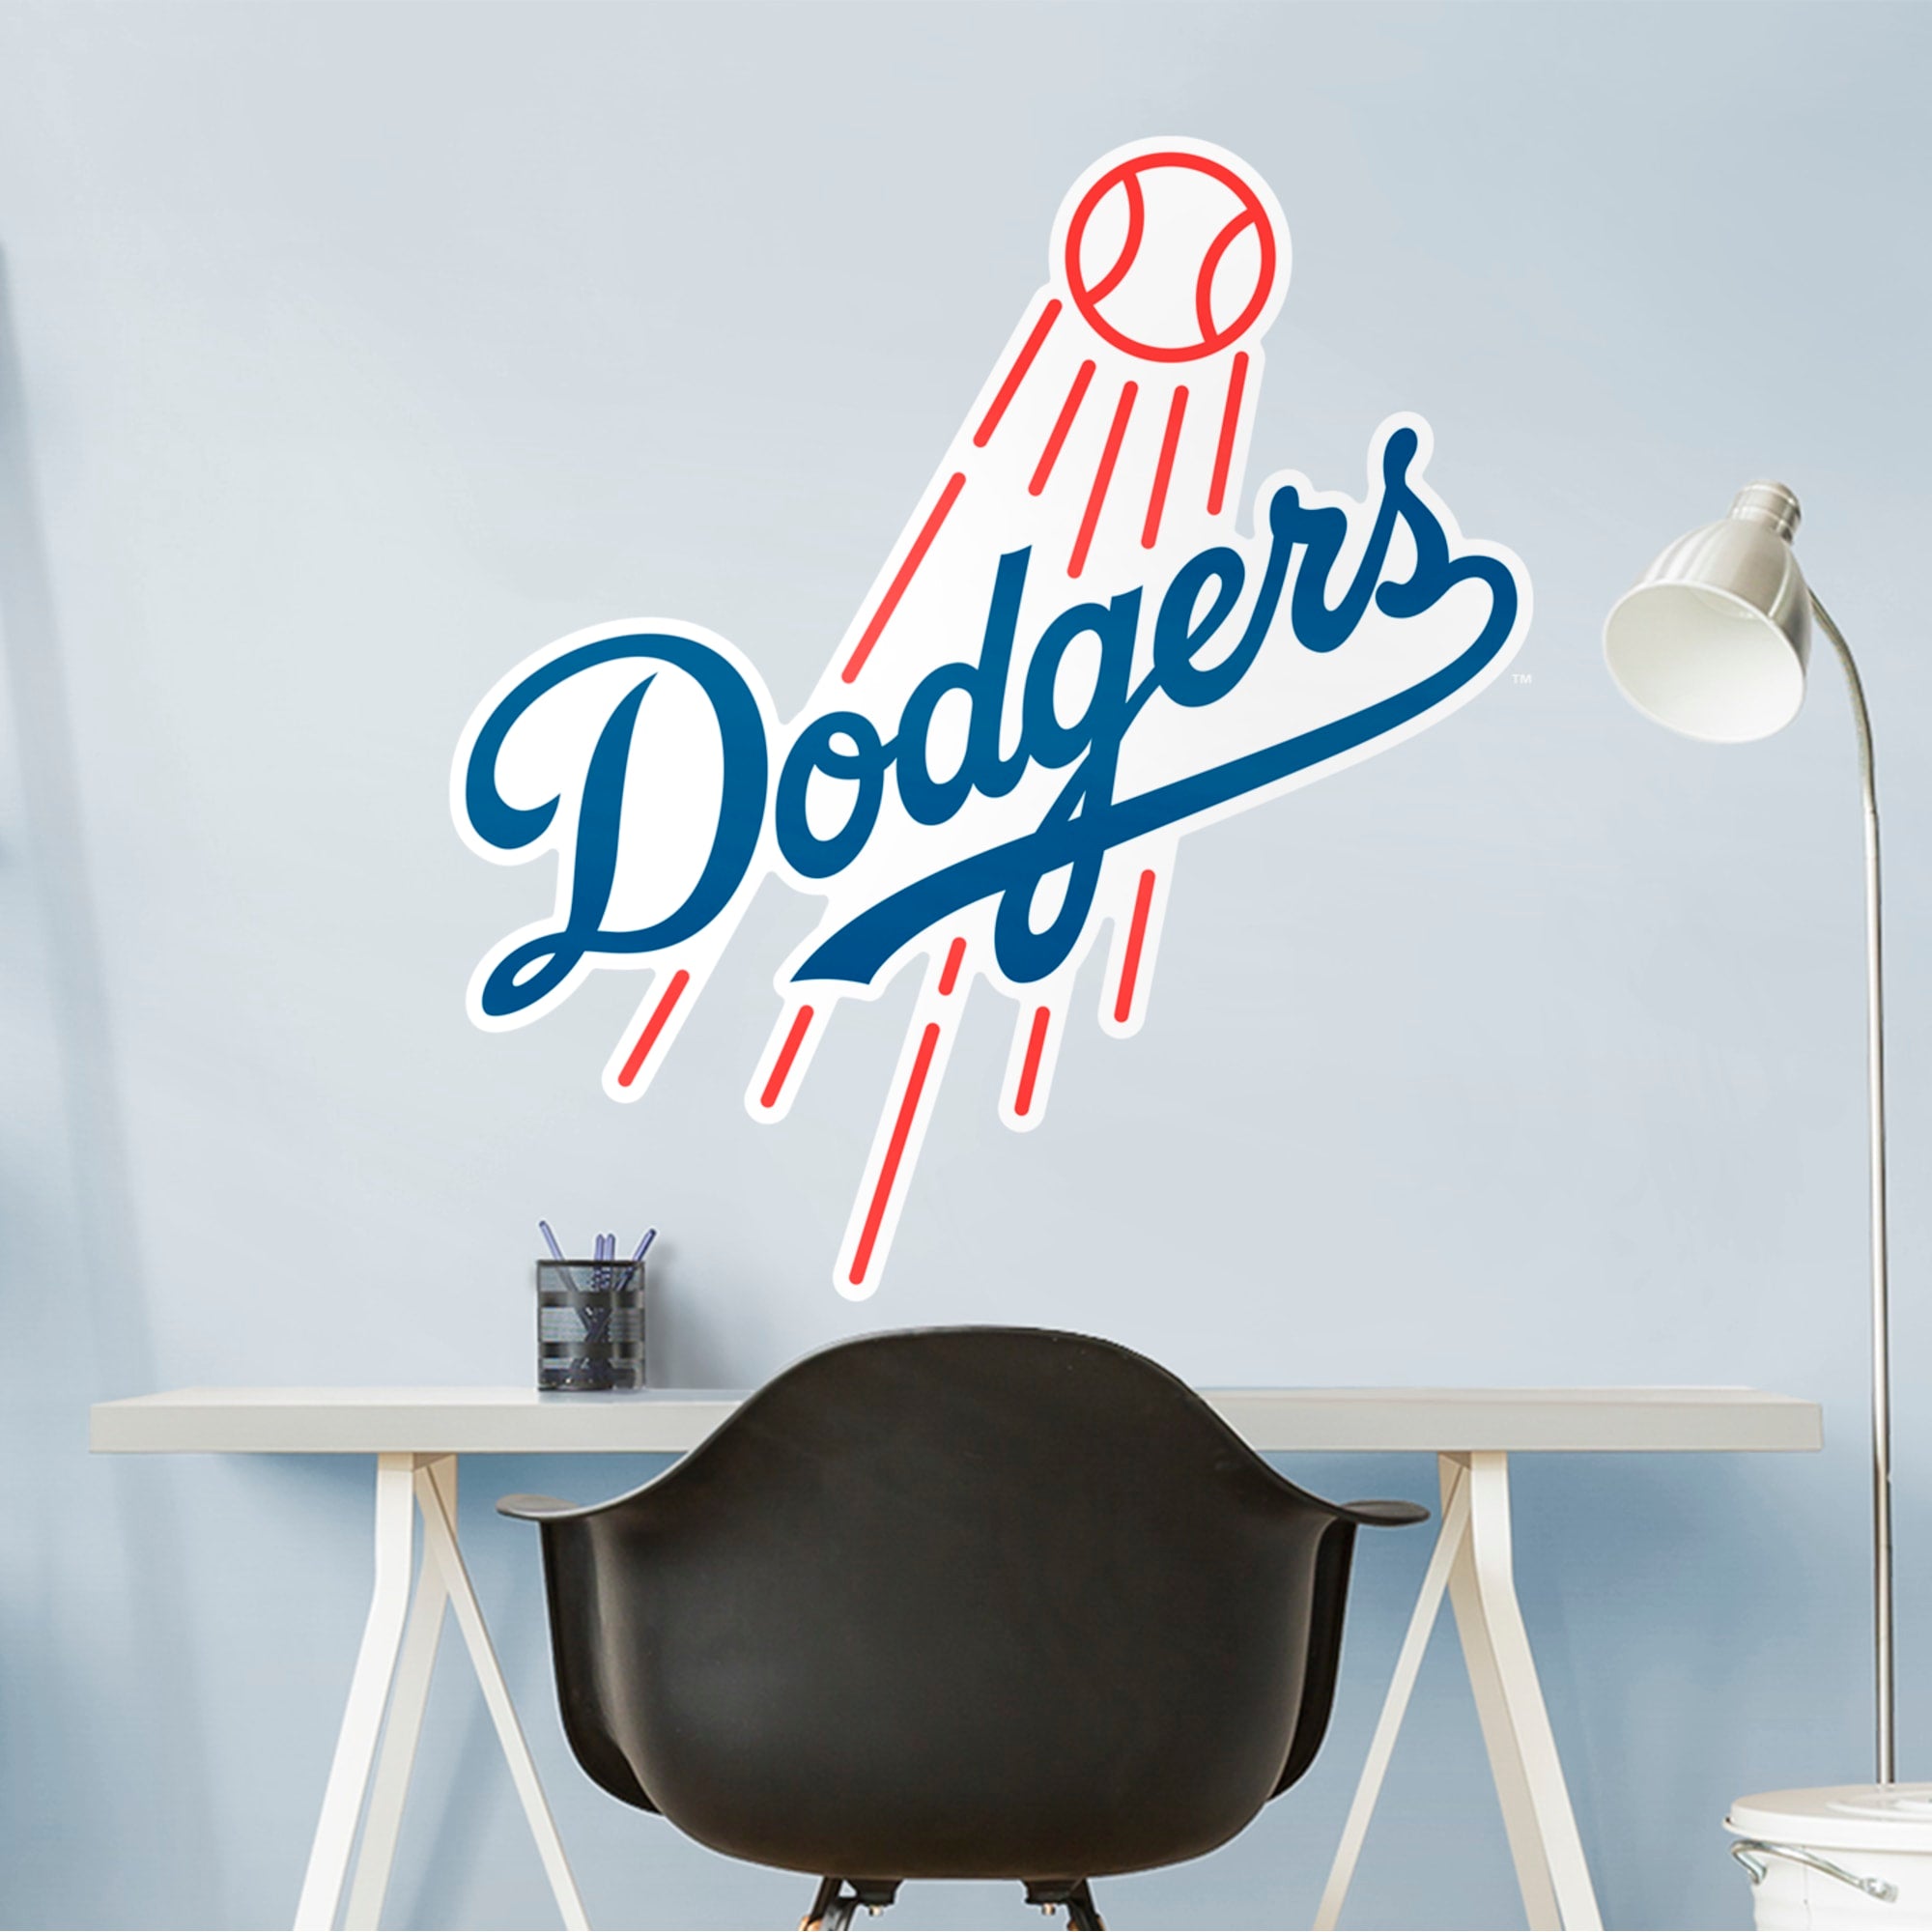 Los Angeles Dodgers: Logo - Officially Licensed MLB Removable Wall Decal Giant Logo (39"W x 41"H) by Fathead | Vinyl